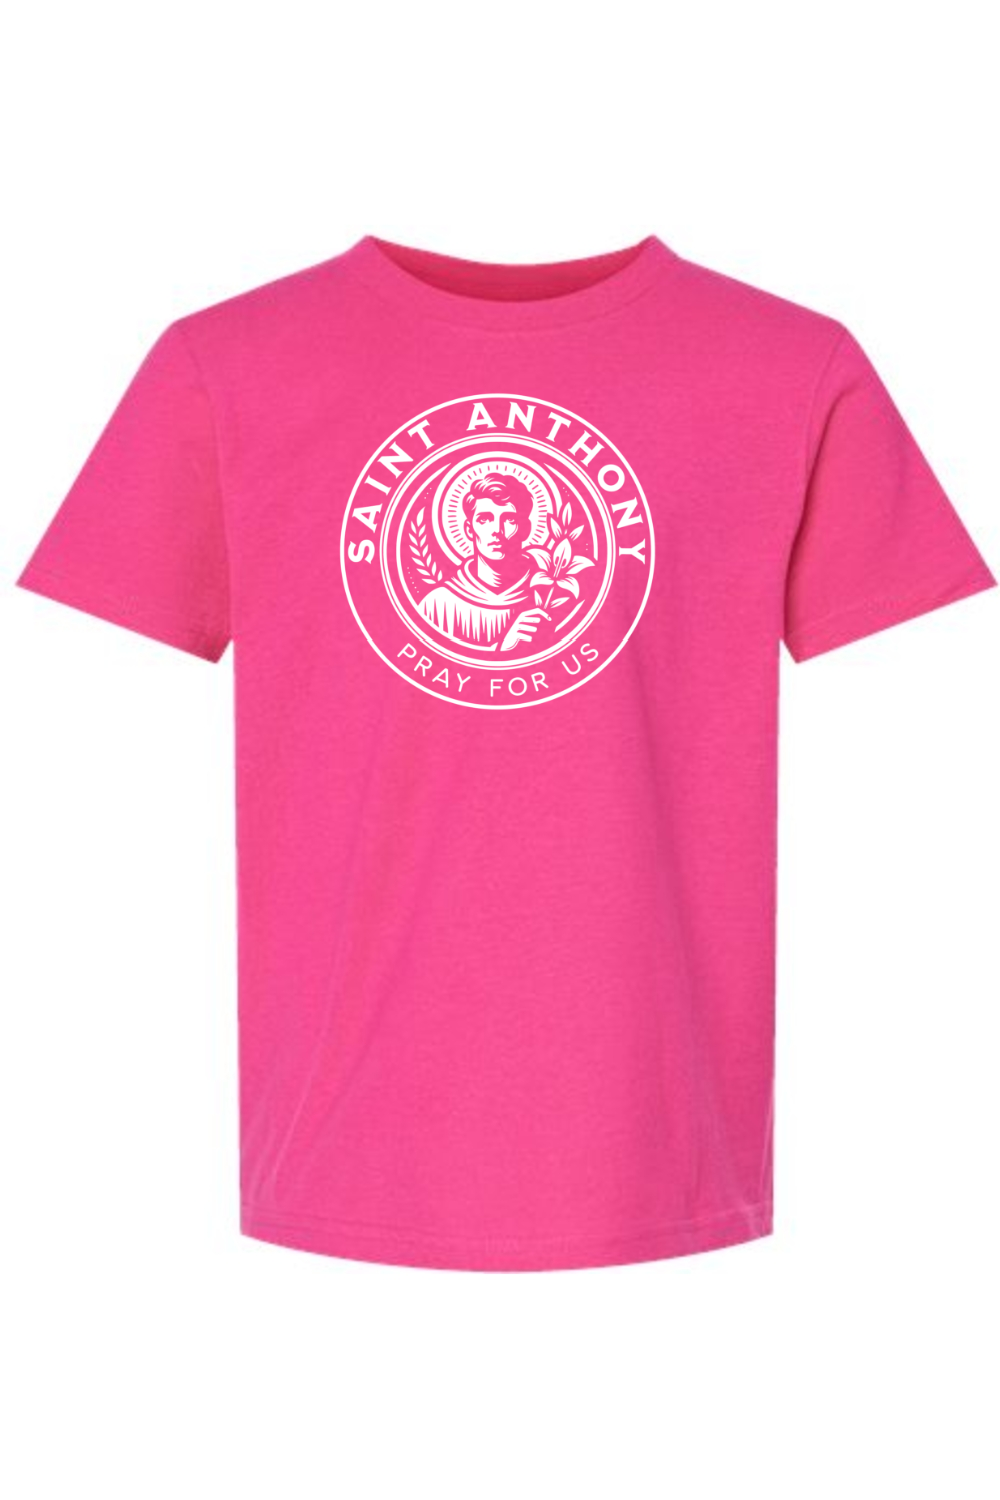 St. Anthony - Pray for Us - Kids Tee